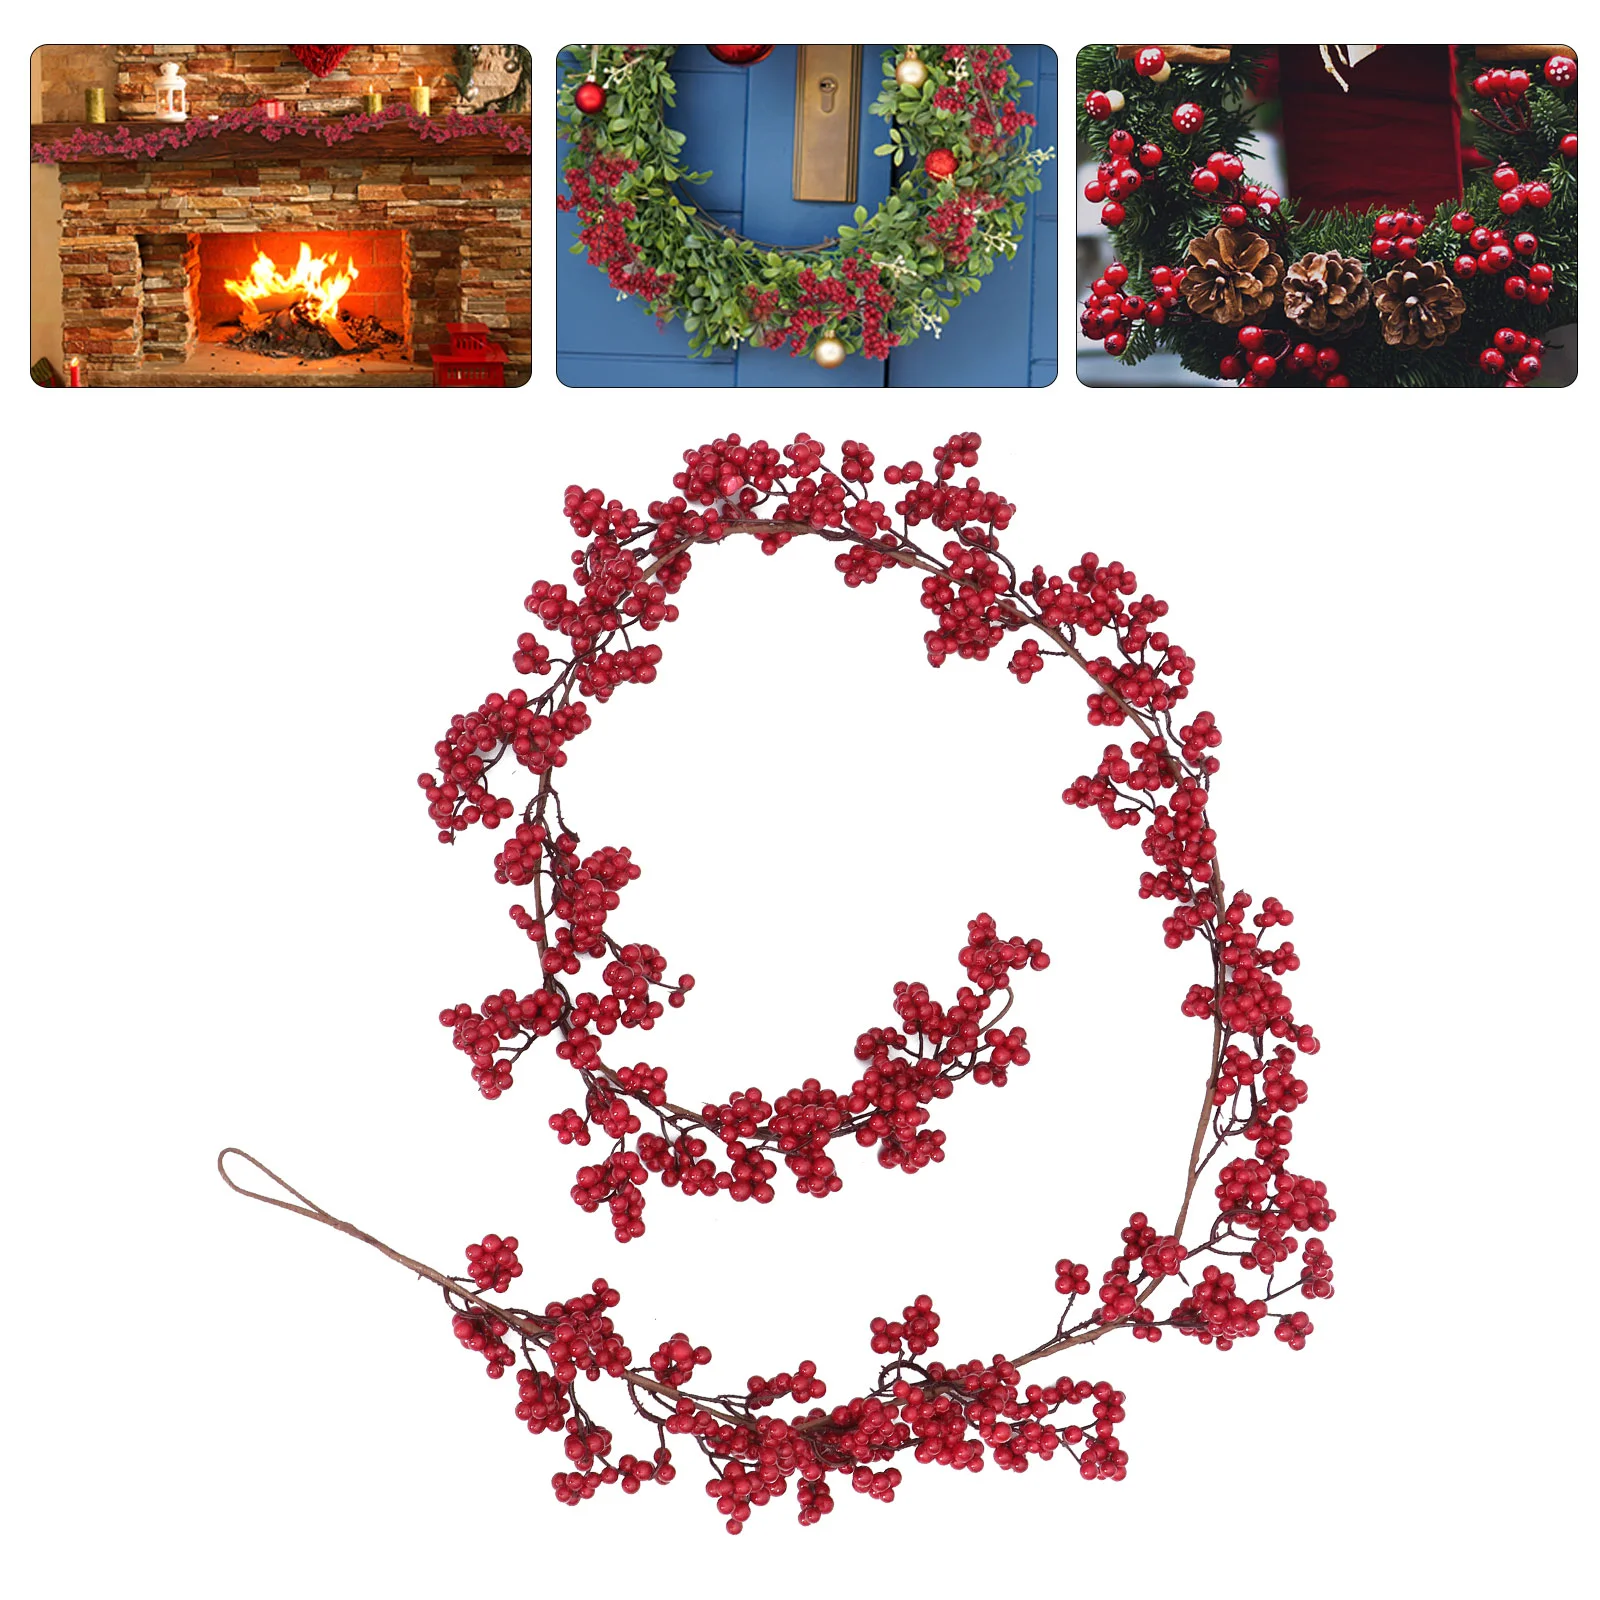 

Christmas Wreath Berry Prop Decorbranch Fruit Layout Scene Door Flower Tree Front Fireplace Autumn Decorations Holiday Festival